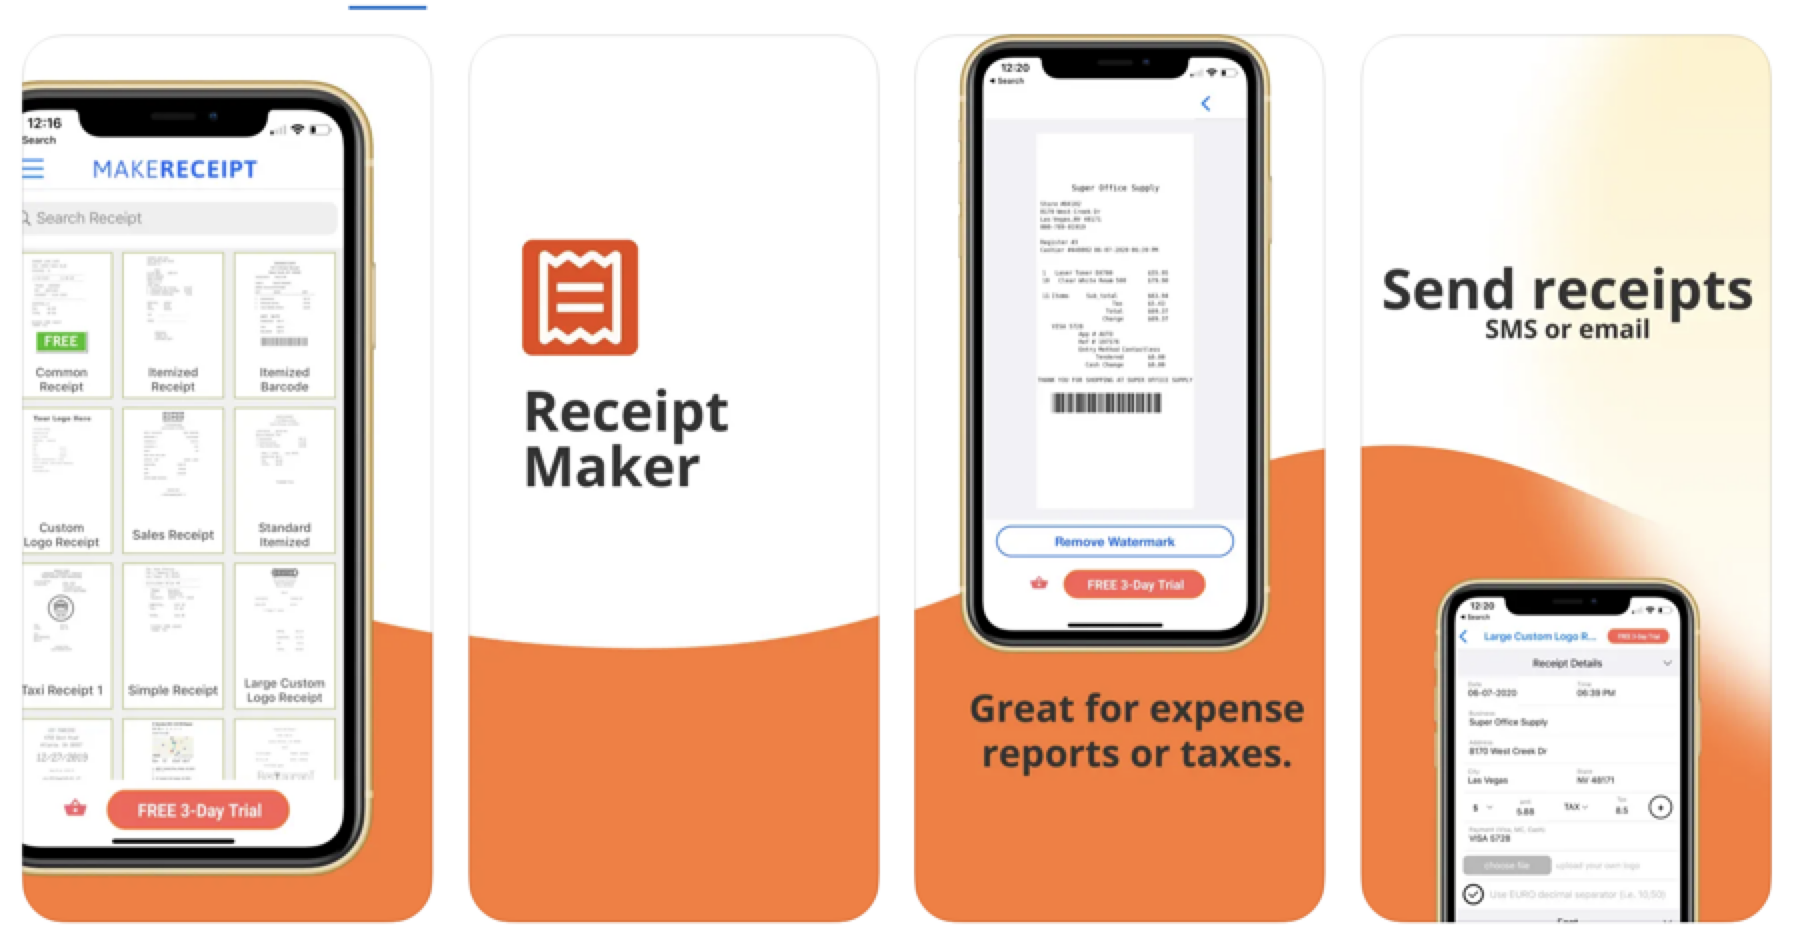 Make Receipt now available for iOS and Android